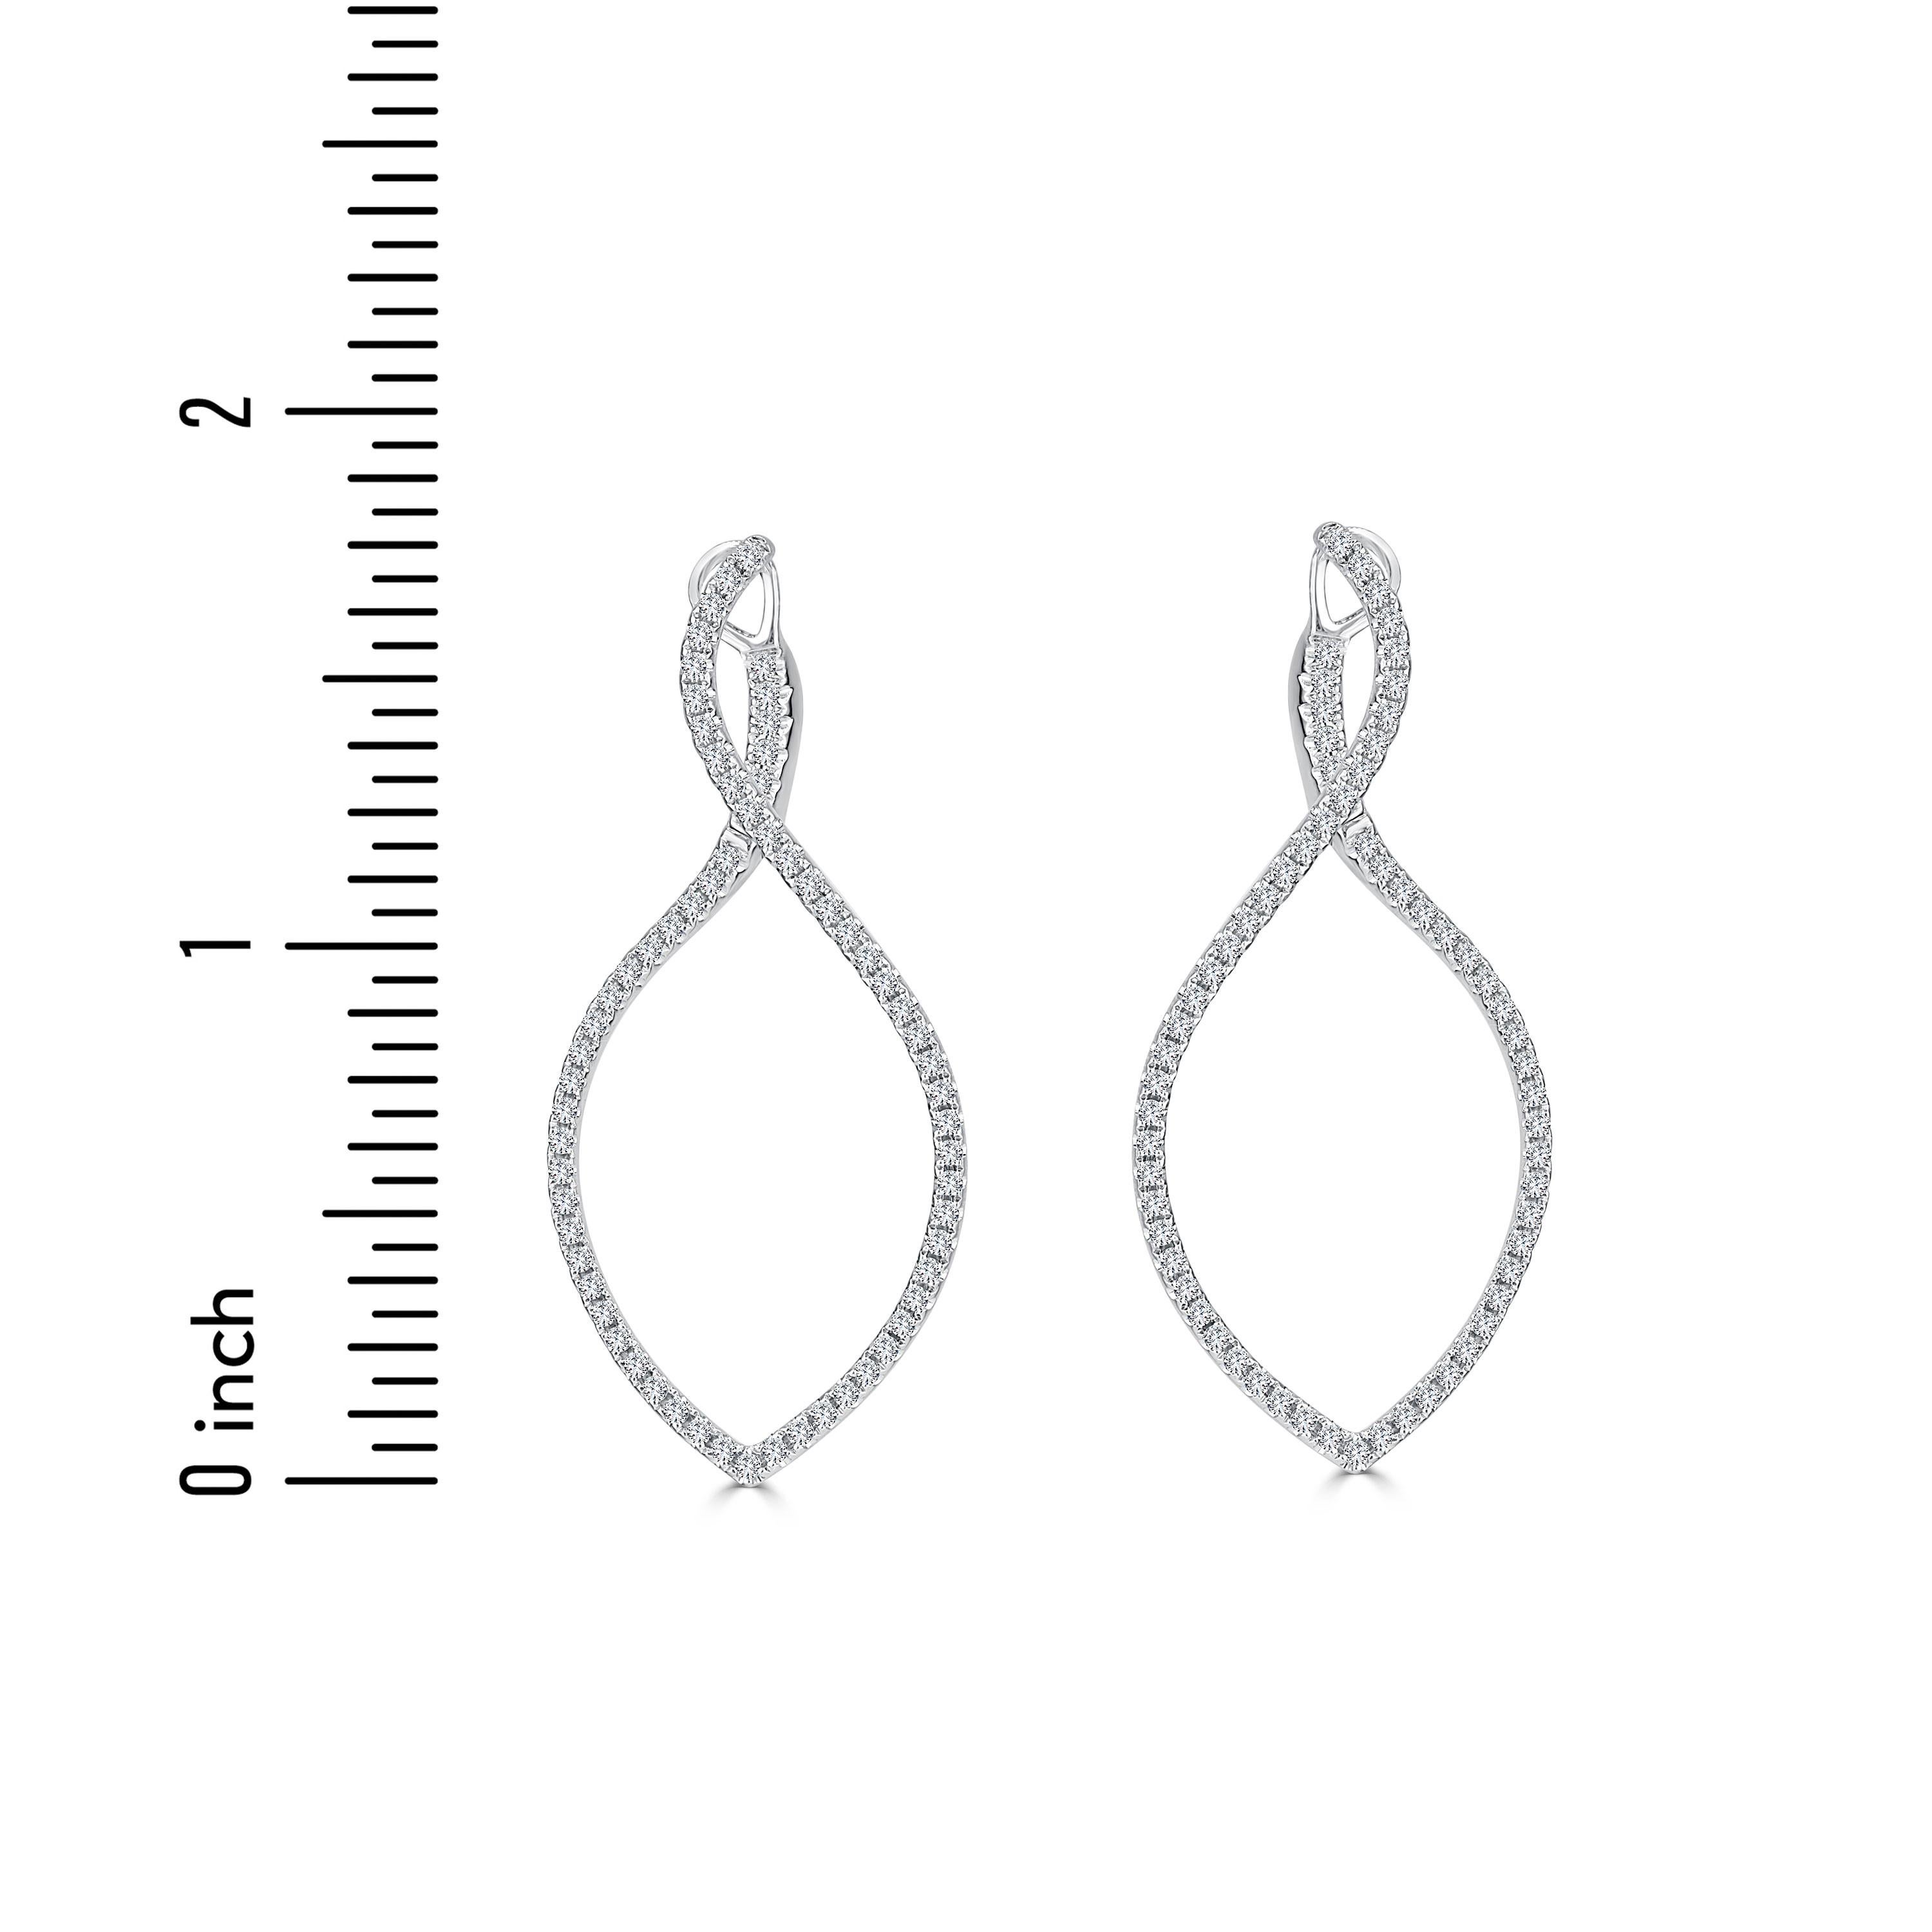 These exquisite hoop earrings offer a unique twist on the classic style by incorporating an elegant teardrop swirl design. Adorning the front of the earrings are 1.01 carats of round white diamonds, adding a touch of sparkle and sophistication. What